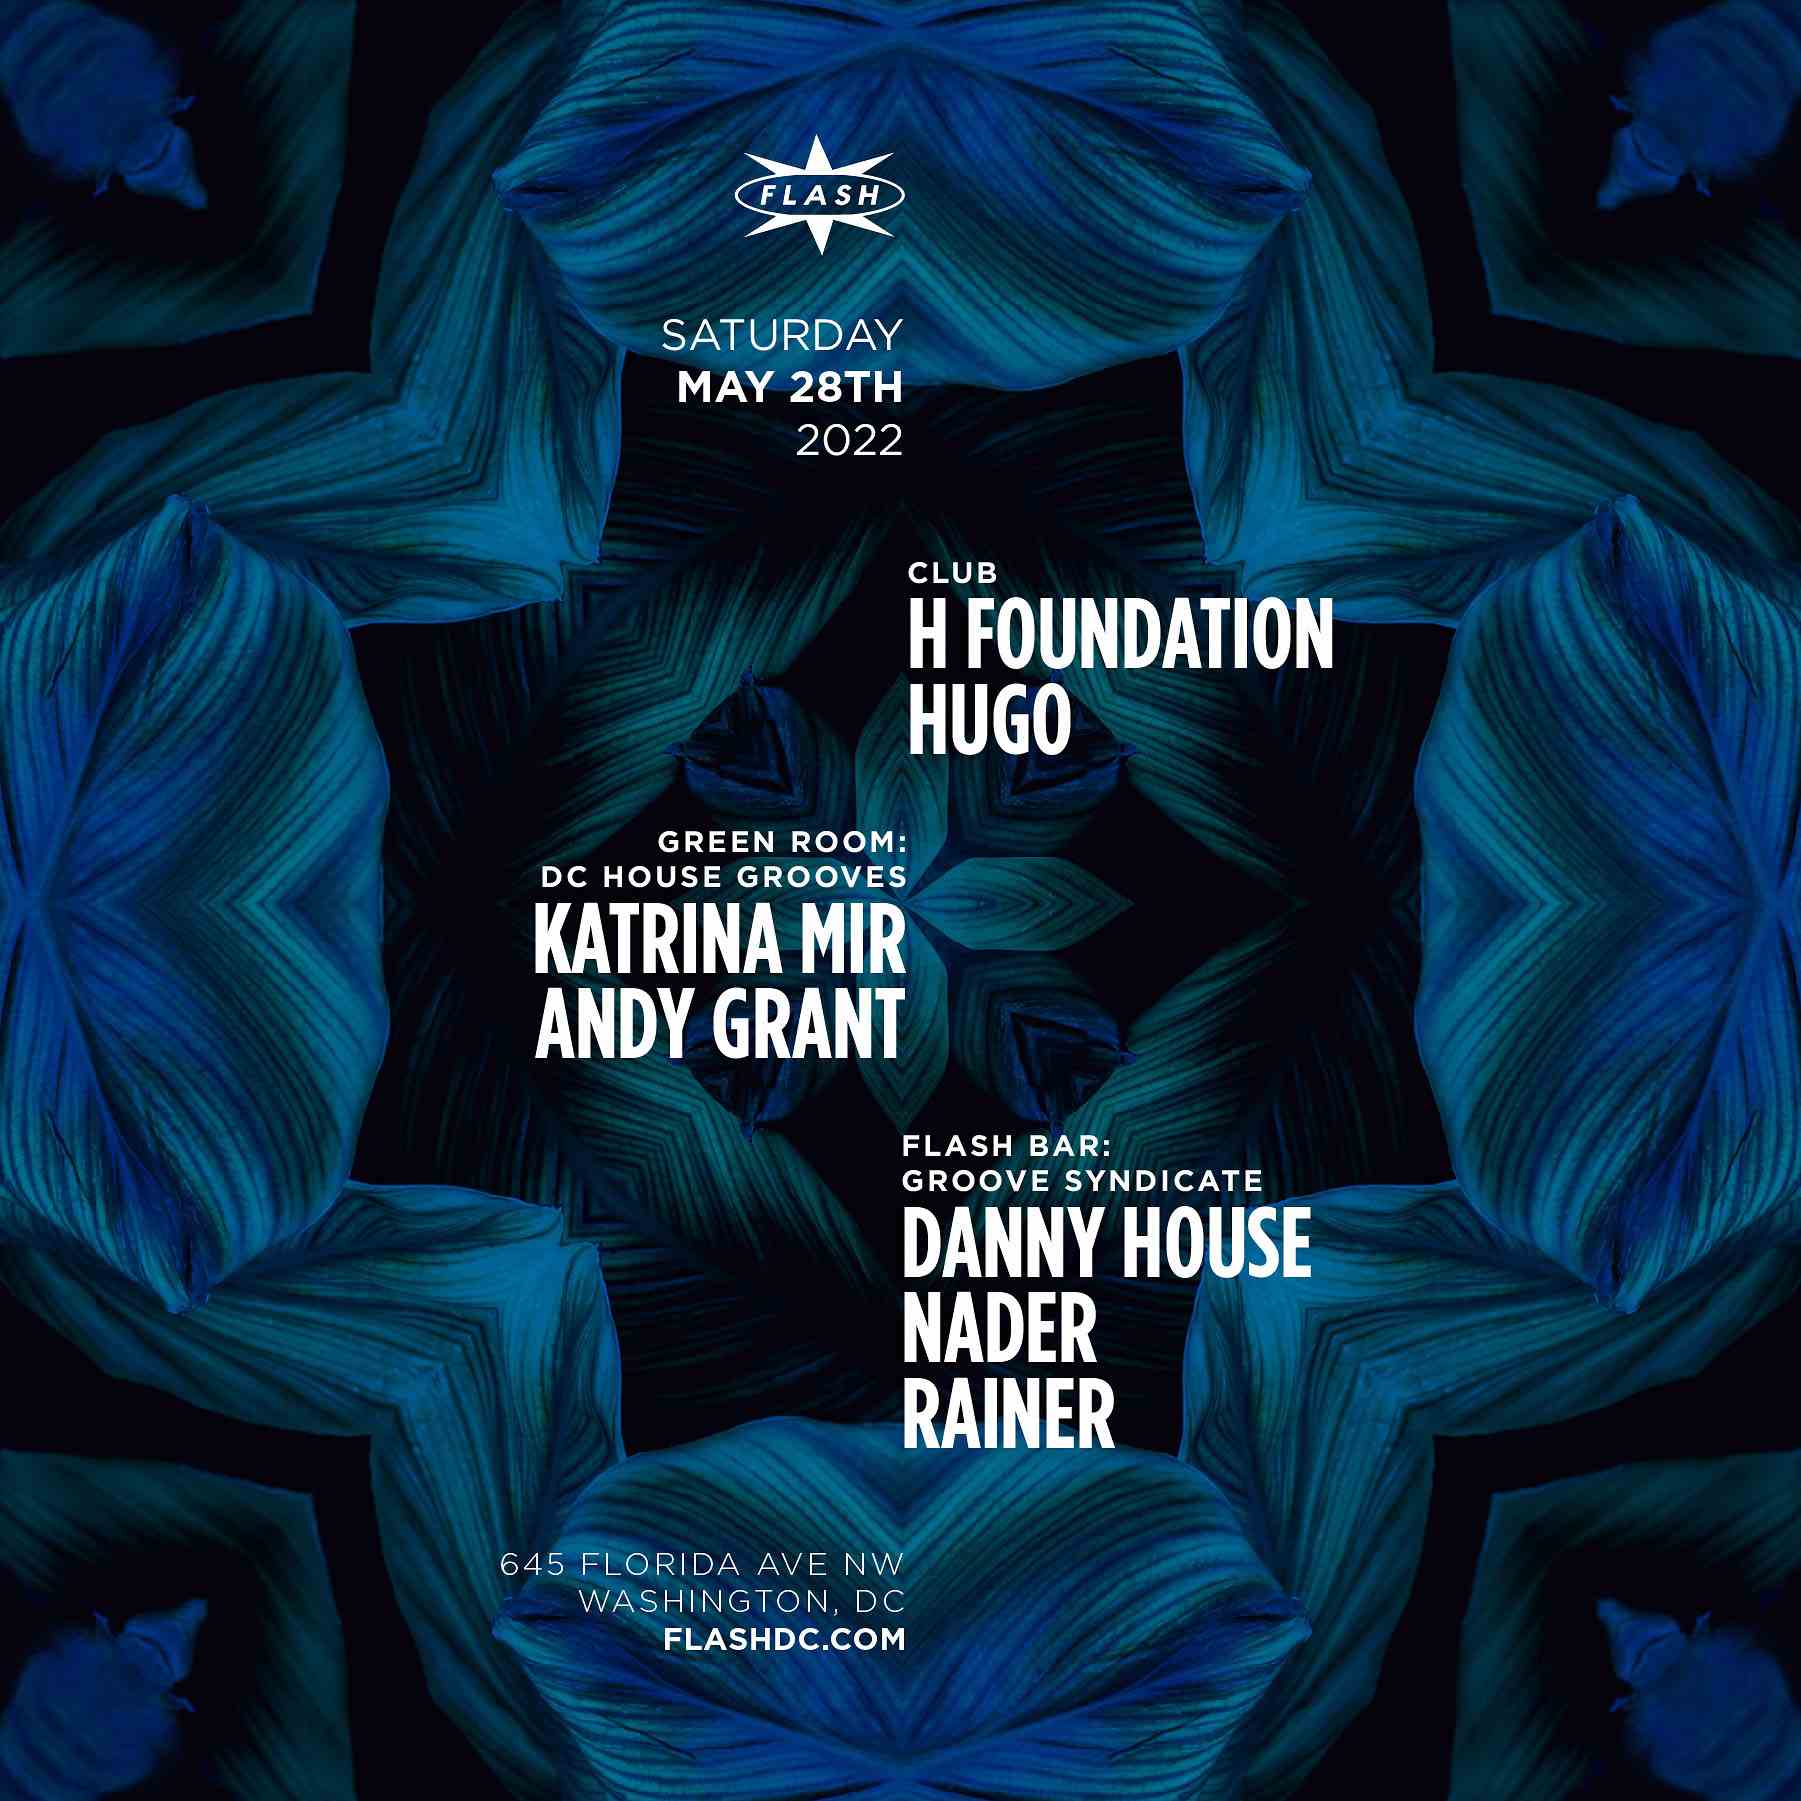 H Foundation - Hugo - DC House Grooves: Katrina Mir - Andrew Grant - Groove Syndicate: event thumbnail